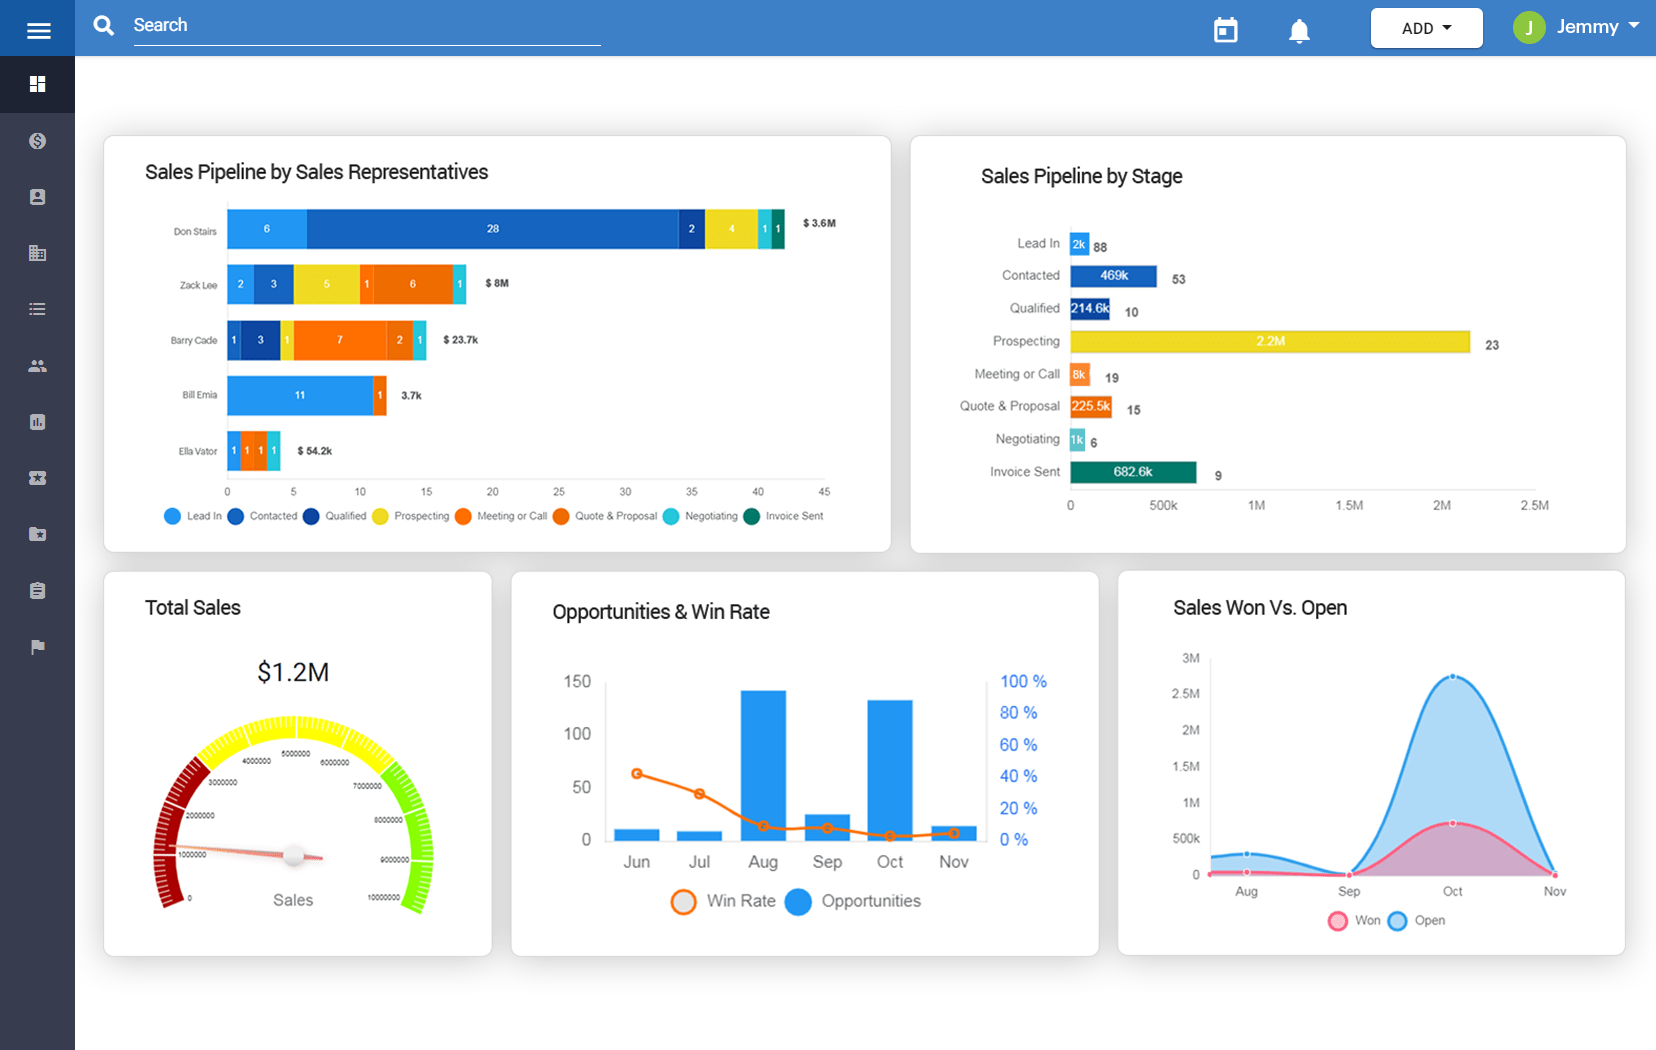 dashboard 33What's New in Wakeupsales - June 2019